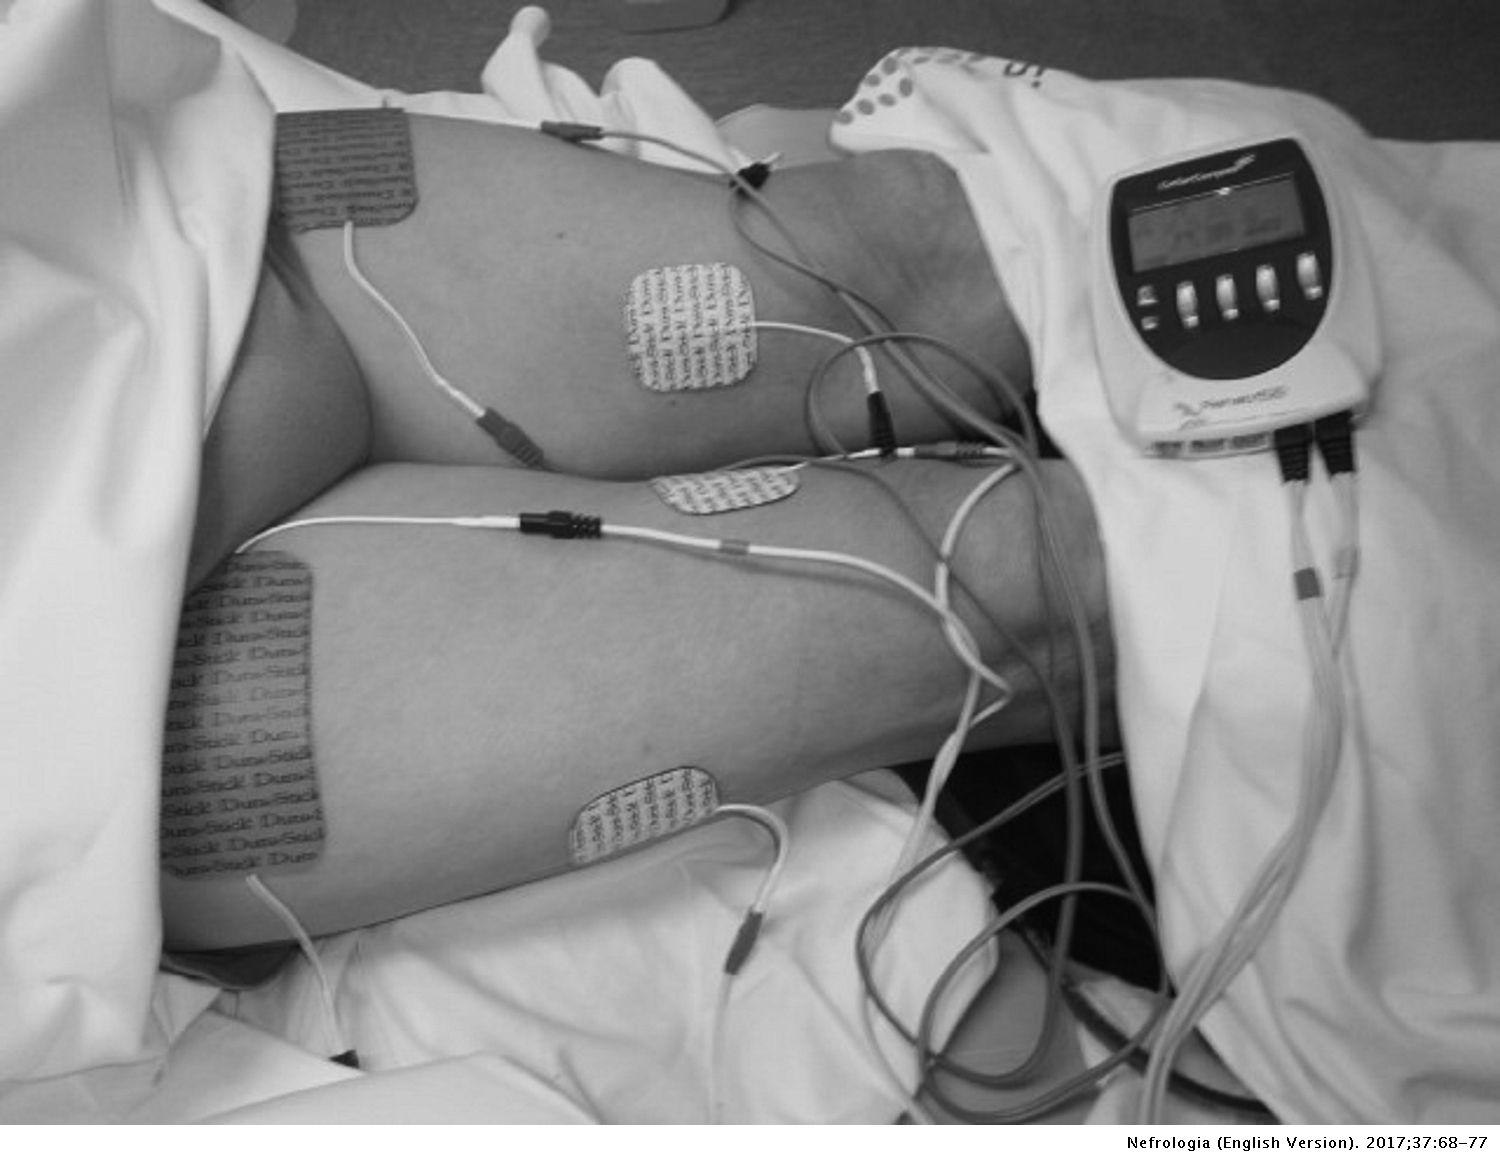 The effect of neuromuscular electrical stimulation on muscle strength,  functional capacity and body composition in haemodialysis patients